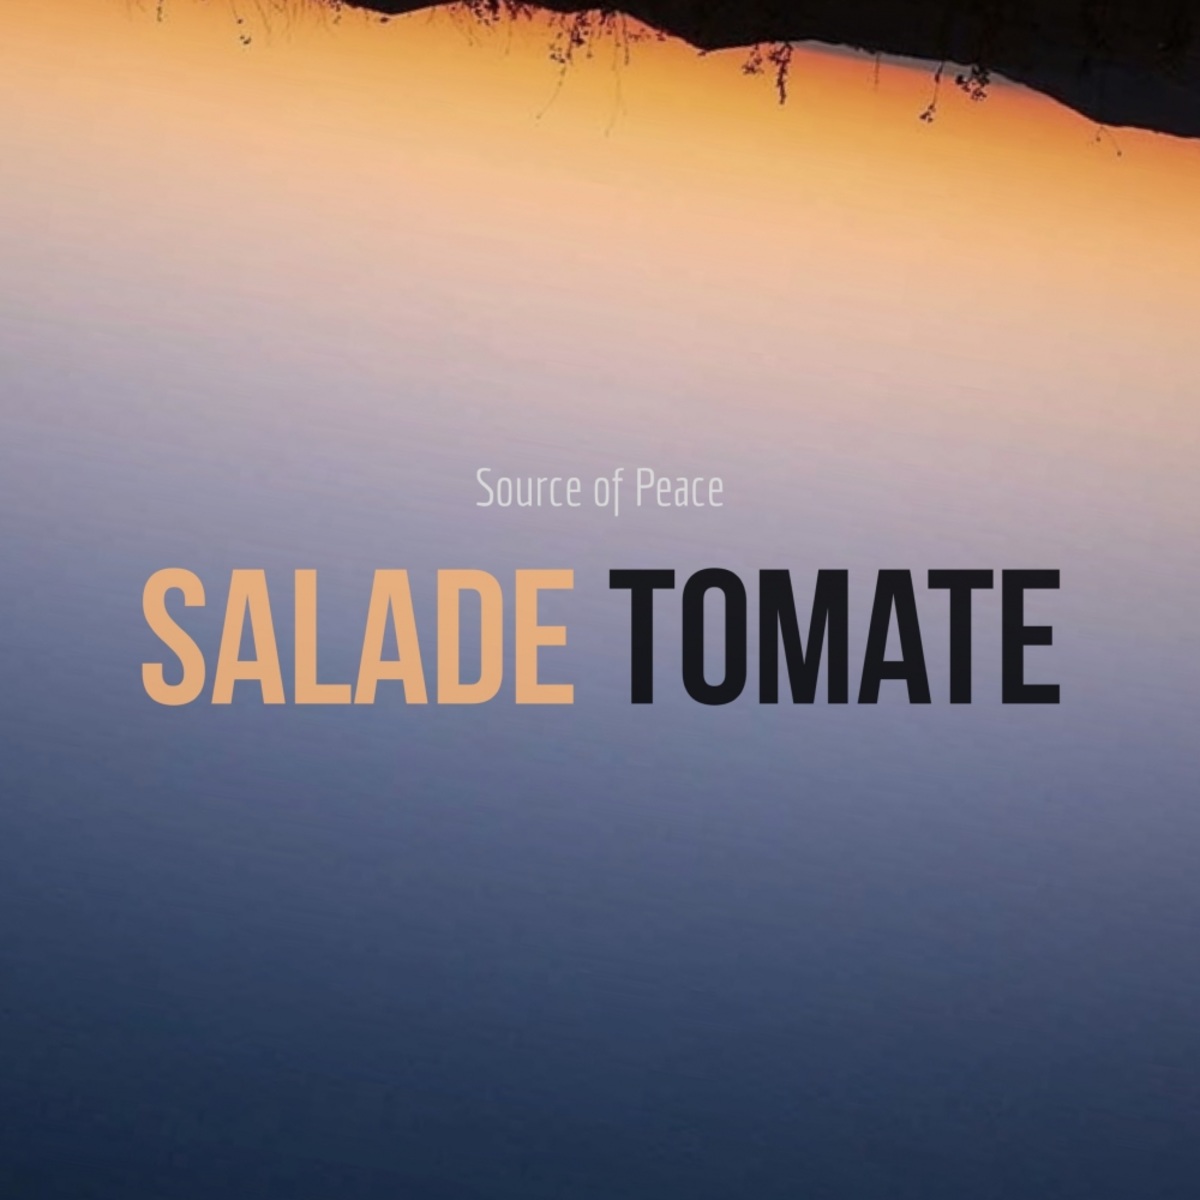 Salade Tomate - Source of Peace / MCT Luxury